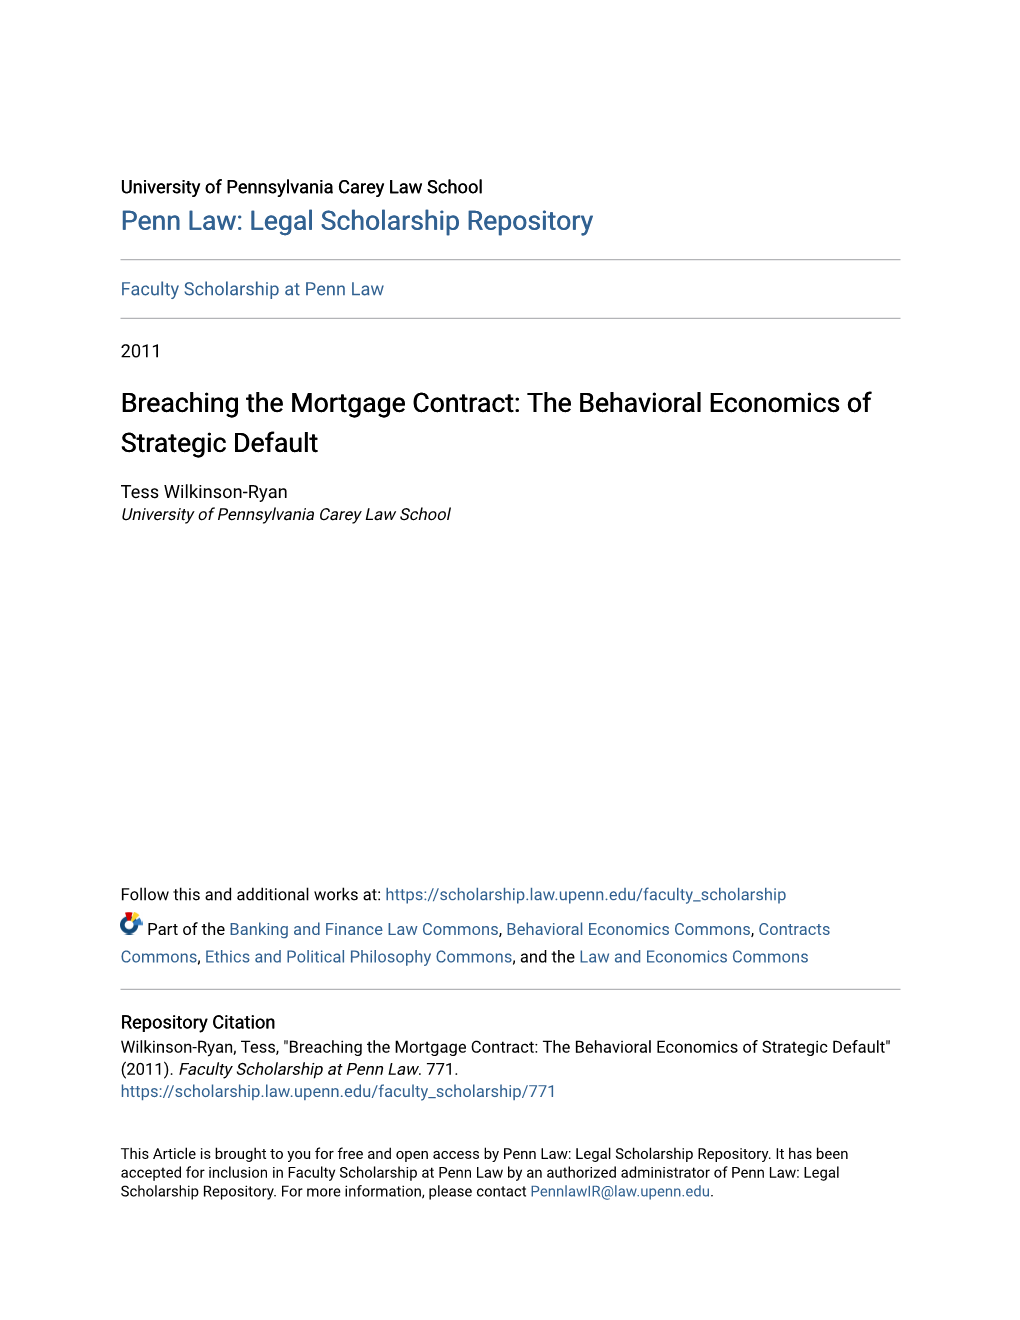 Breaching the Mortgage Contract: the Behavioral Economics of Strategic Default